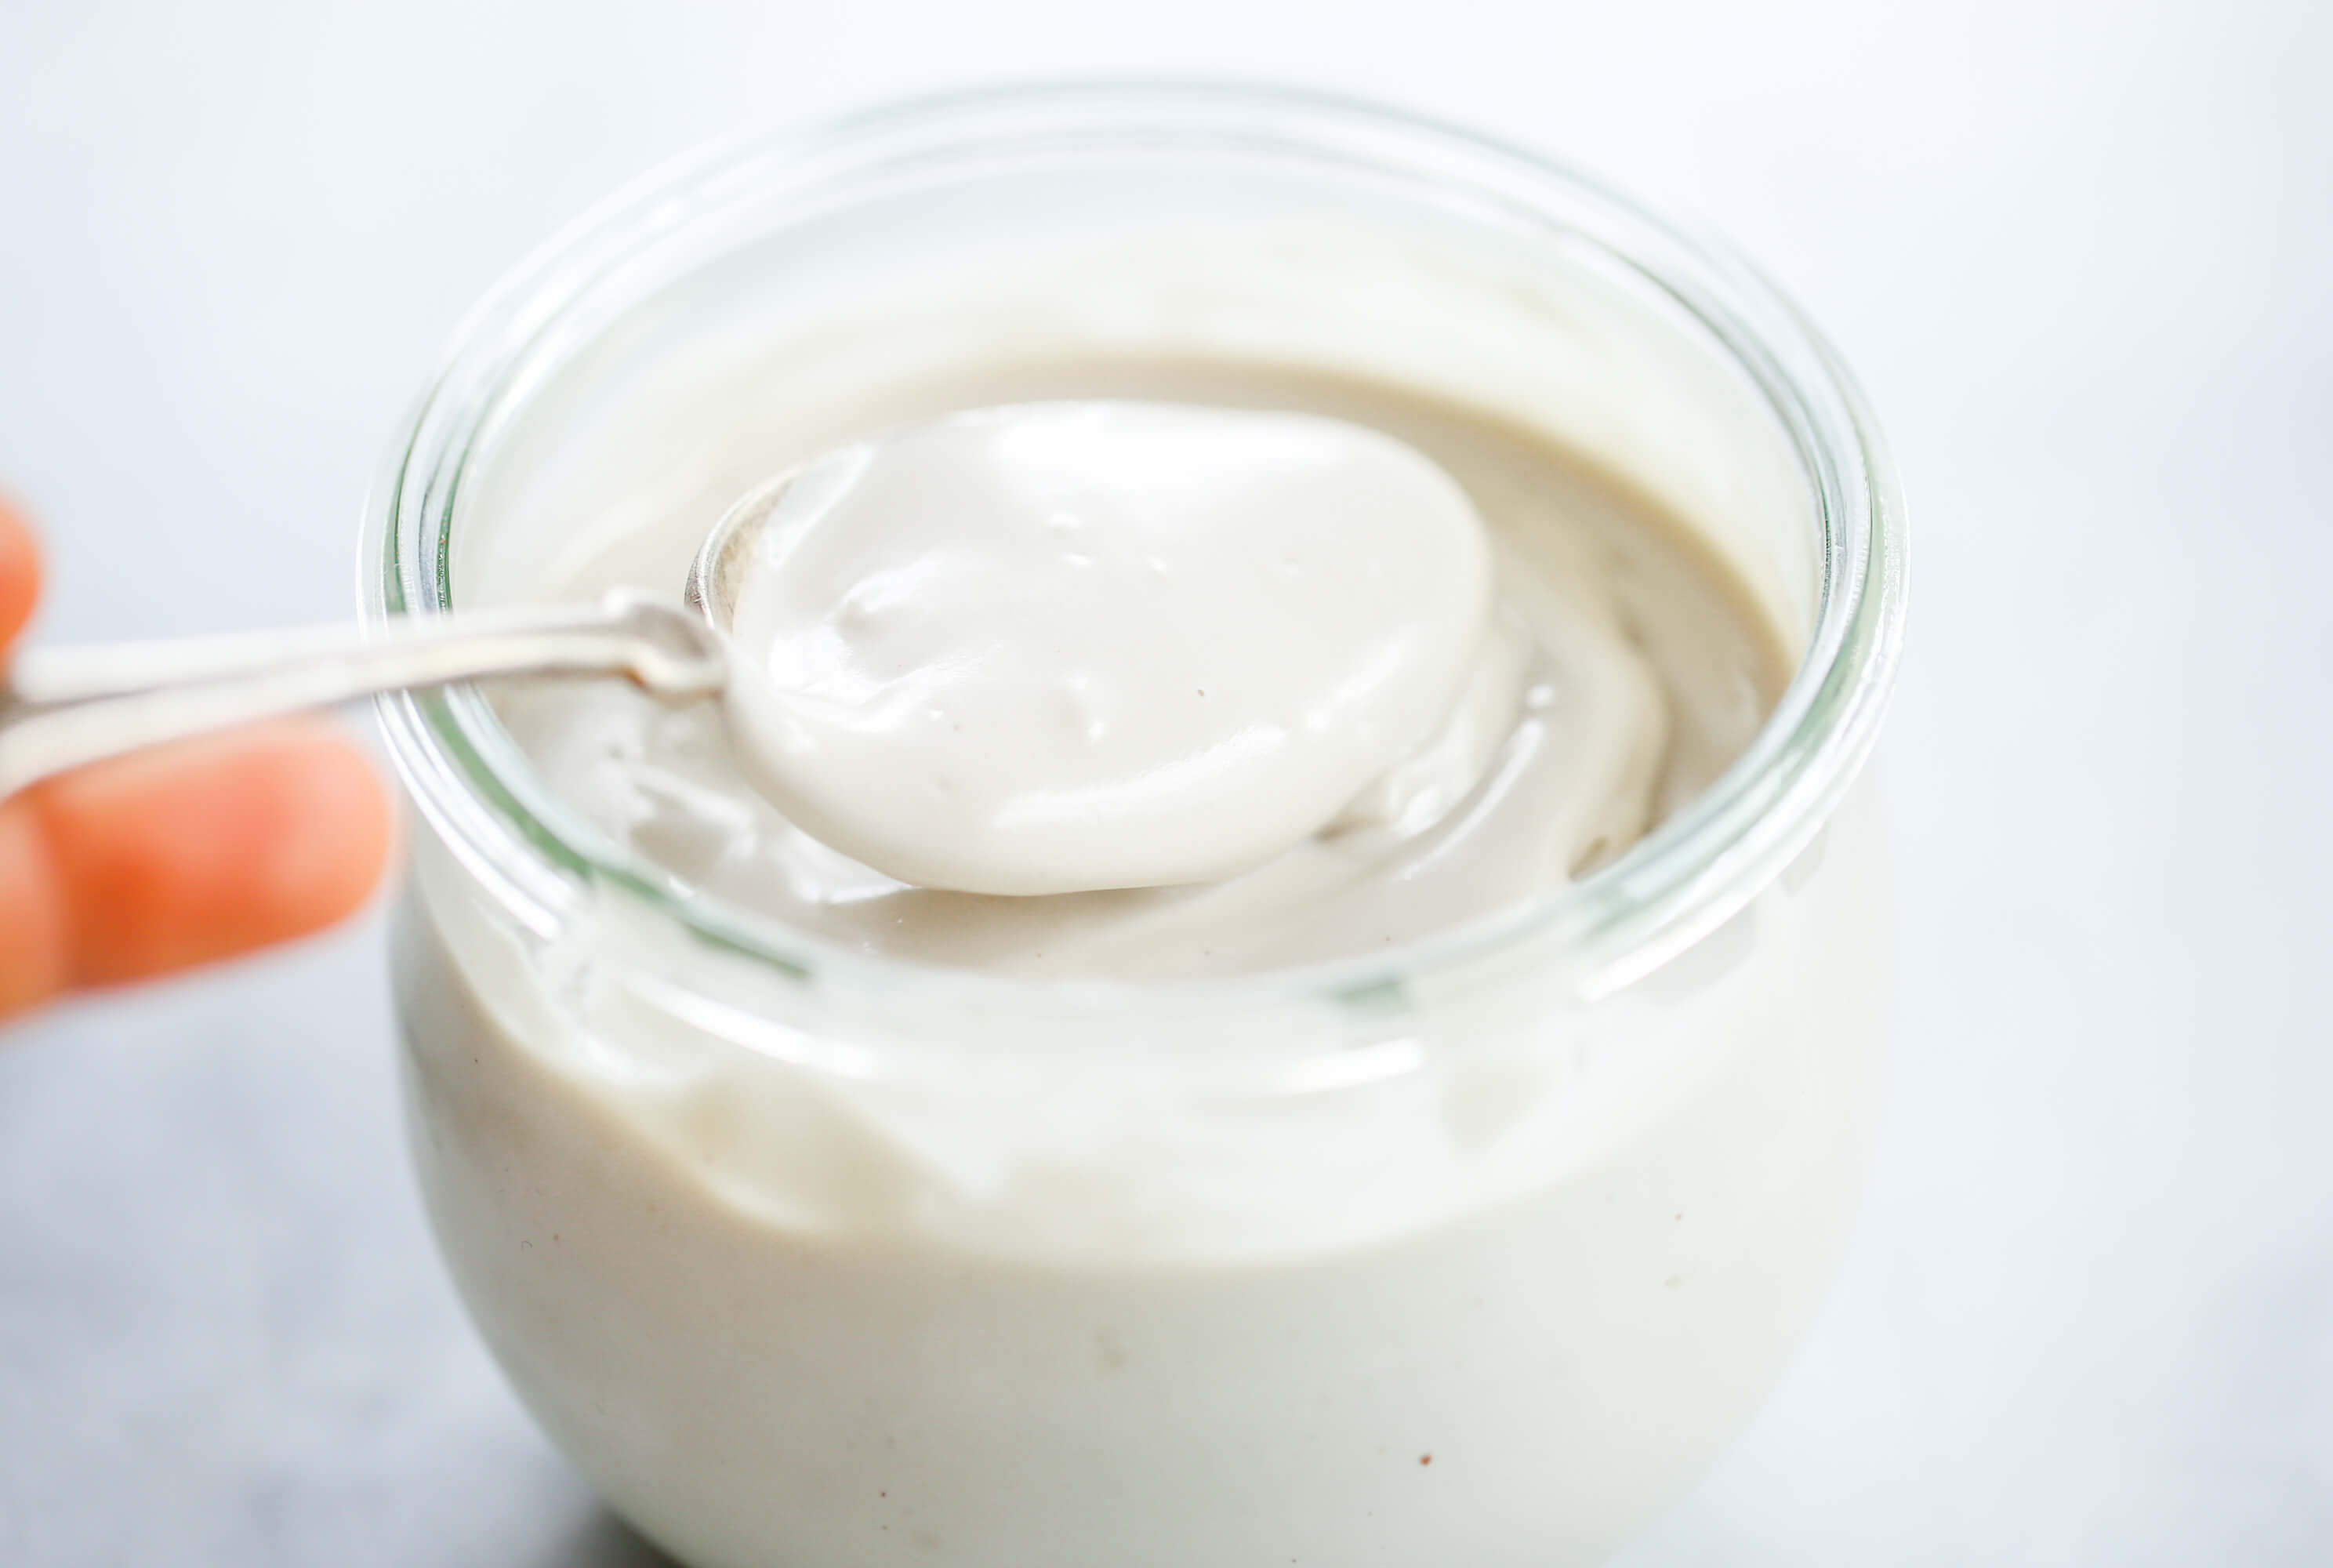 2 minute dairy free yogurt recipe. Healthy cashew yogurt ready in just minutes! This creamy paleo yogurt is perfect served for breakfast with fruit. Made with just three ingredients! #paleo #yogurt #healthybreakfast #recipes #cooking #mealprep